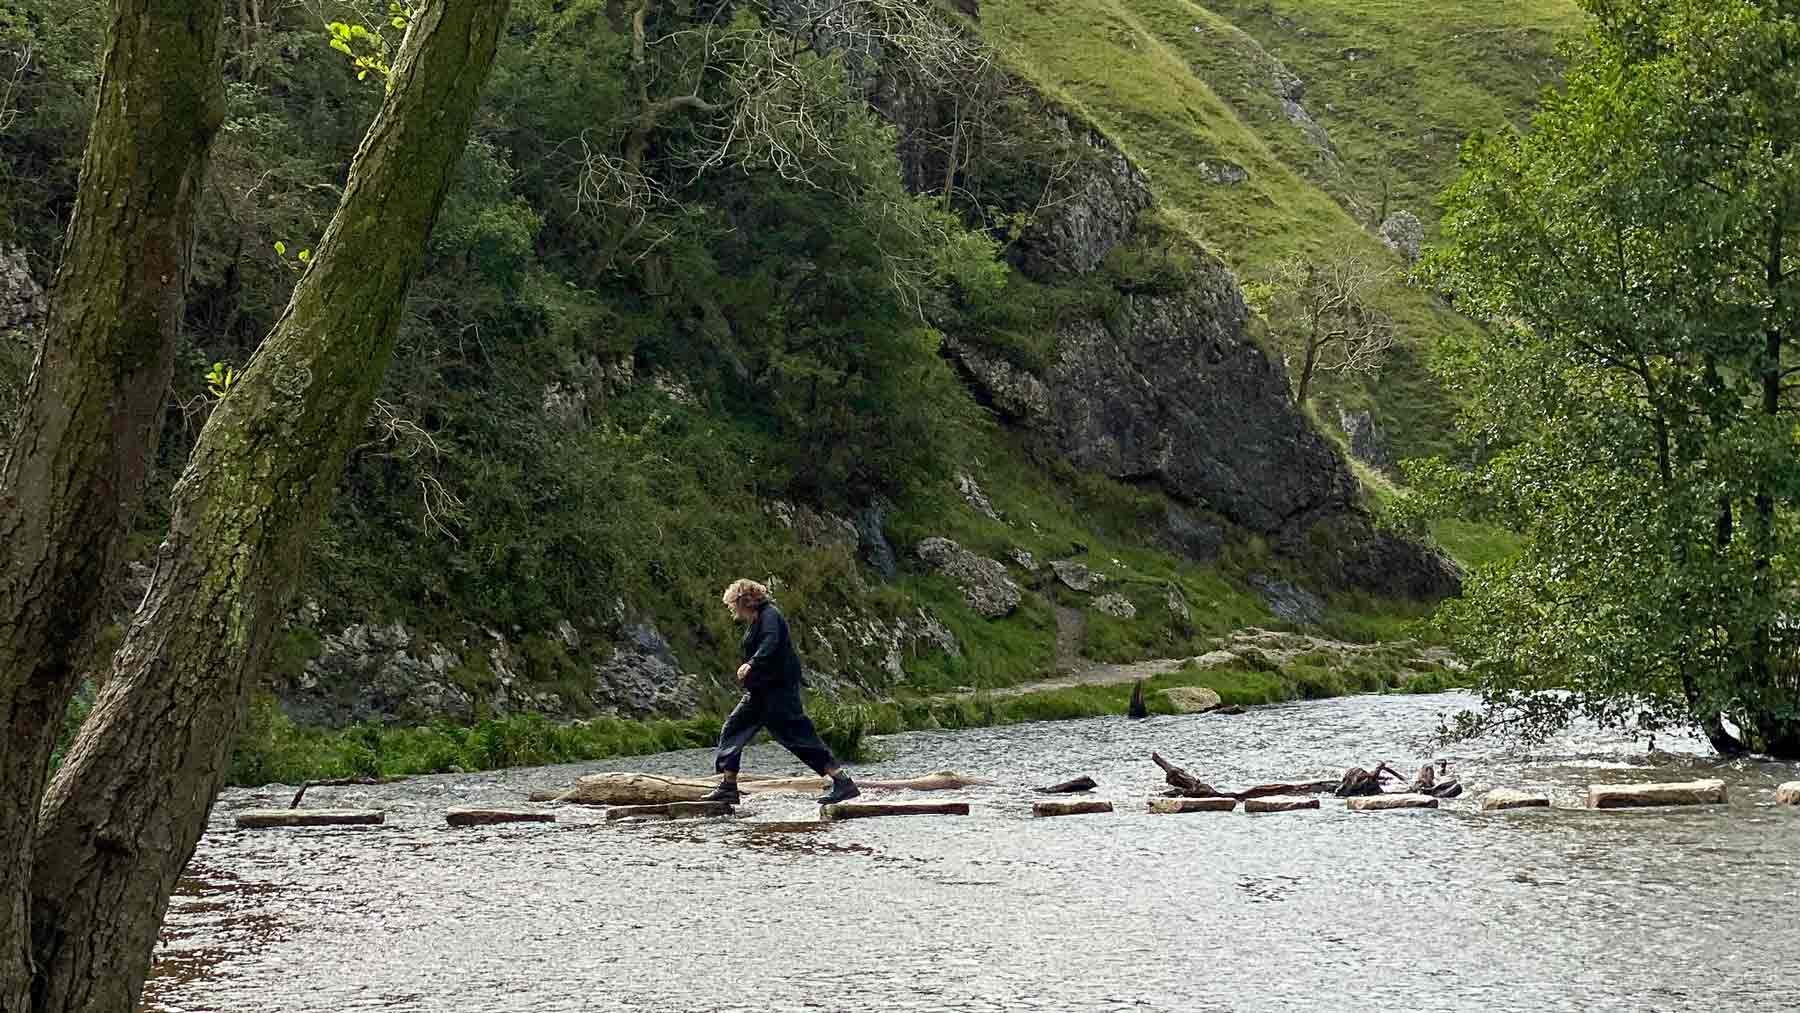 Clare crossing the Dovedale Steeping Stones, wearing Asmuss, in the Peak District